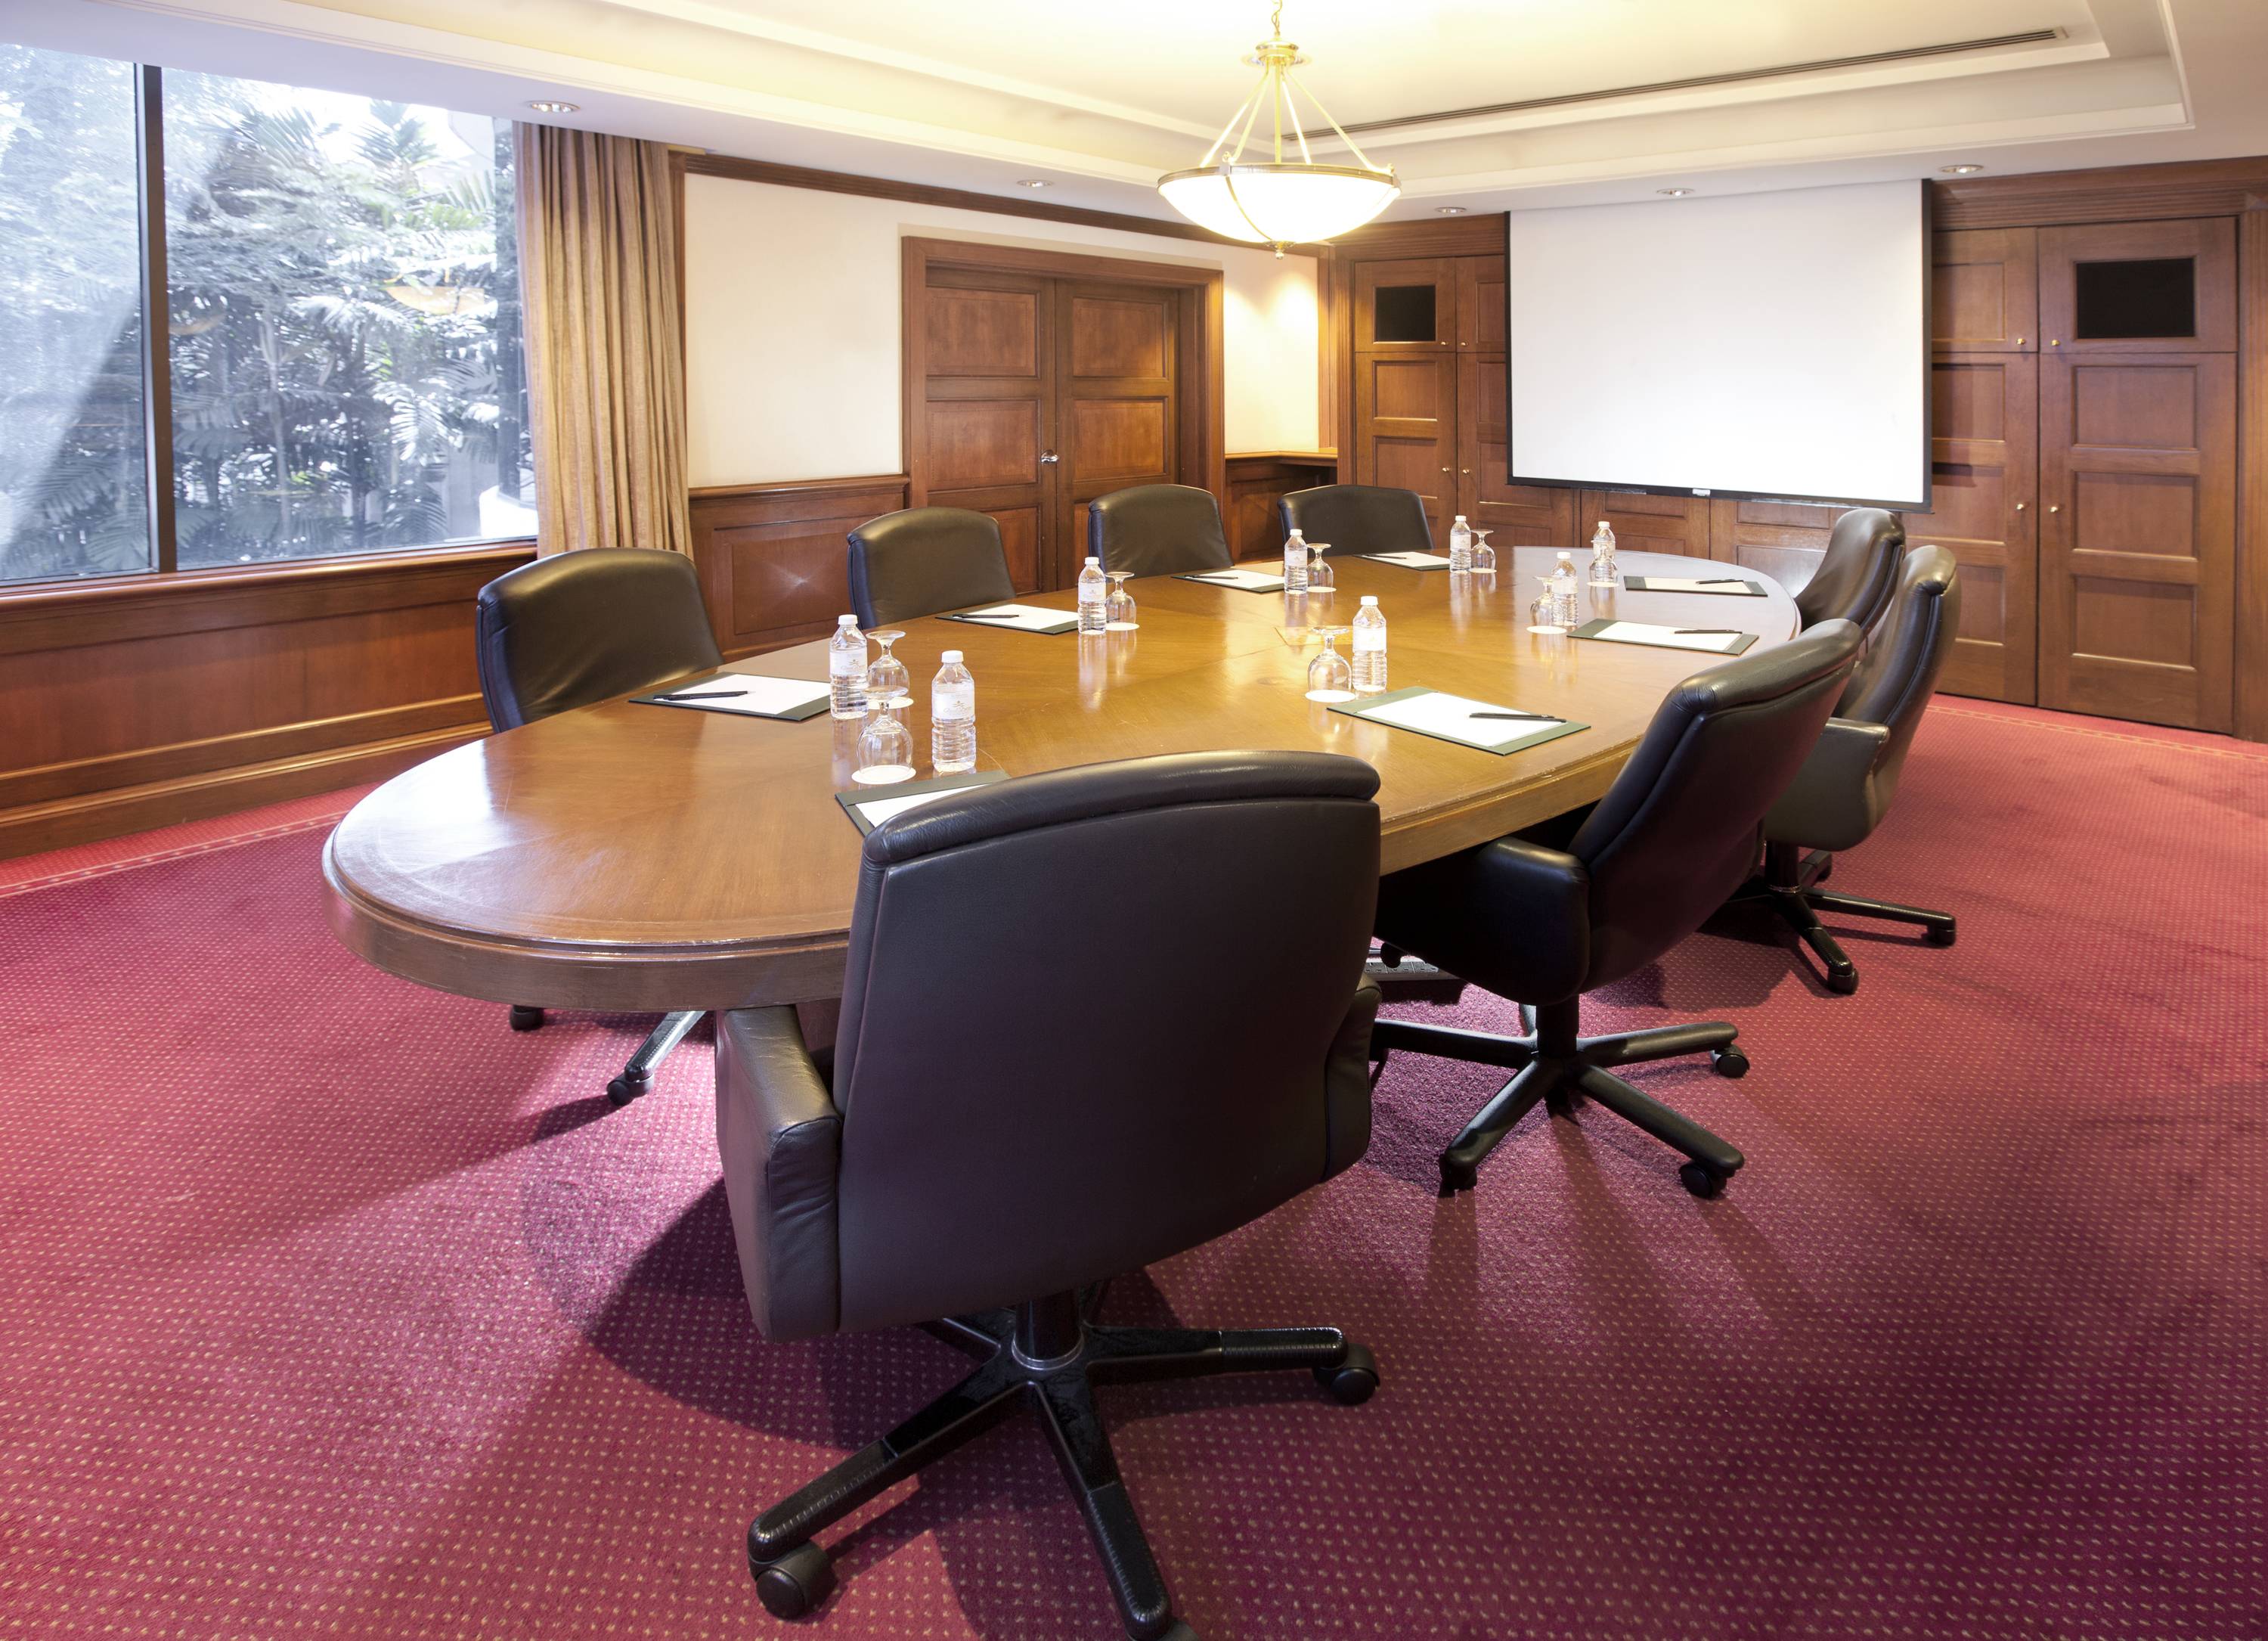 Spacious meeting room for an efficient meeting